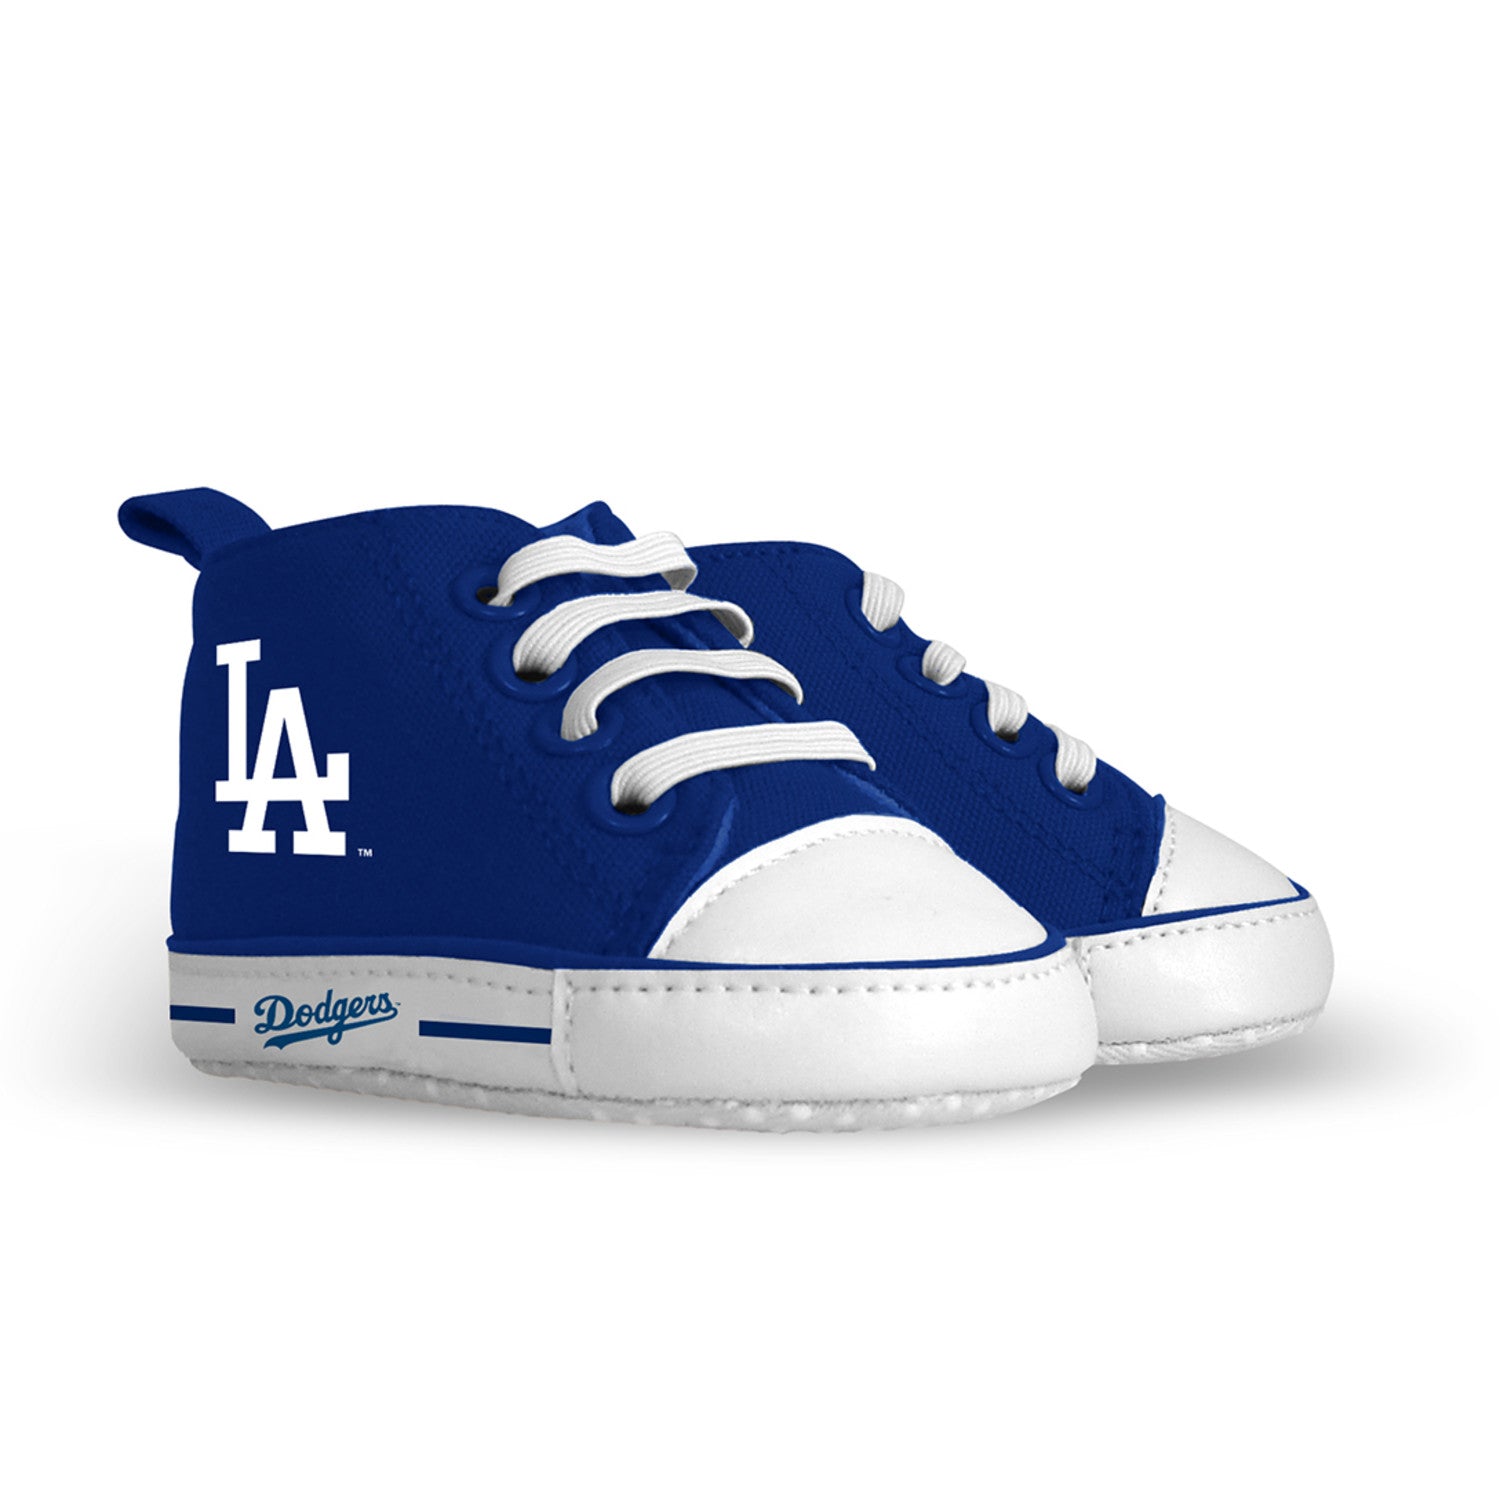 Los Angeles Dodgers Baby Shoes